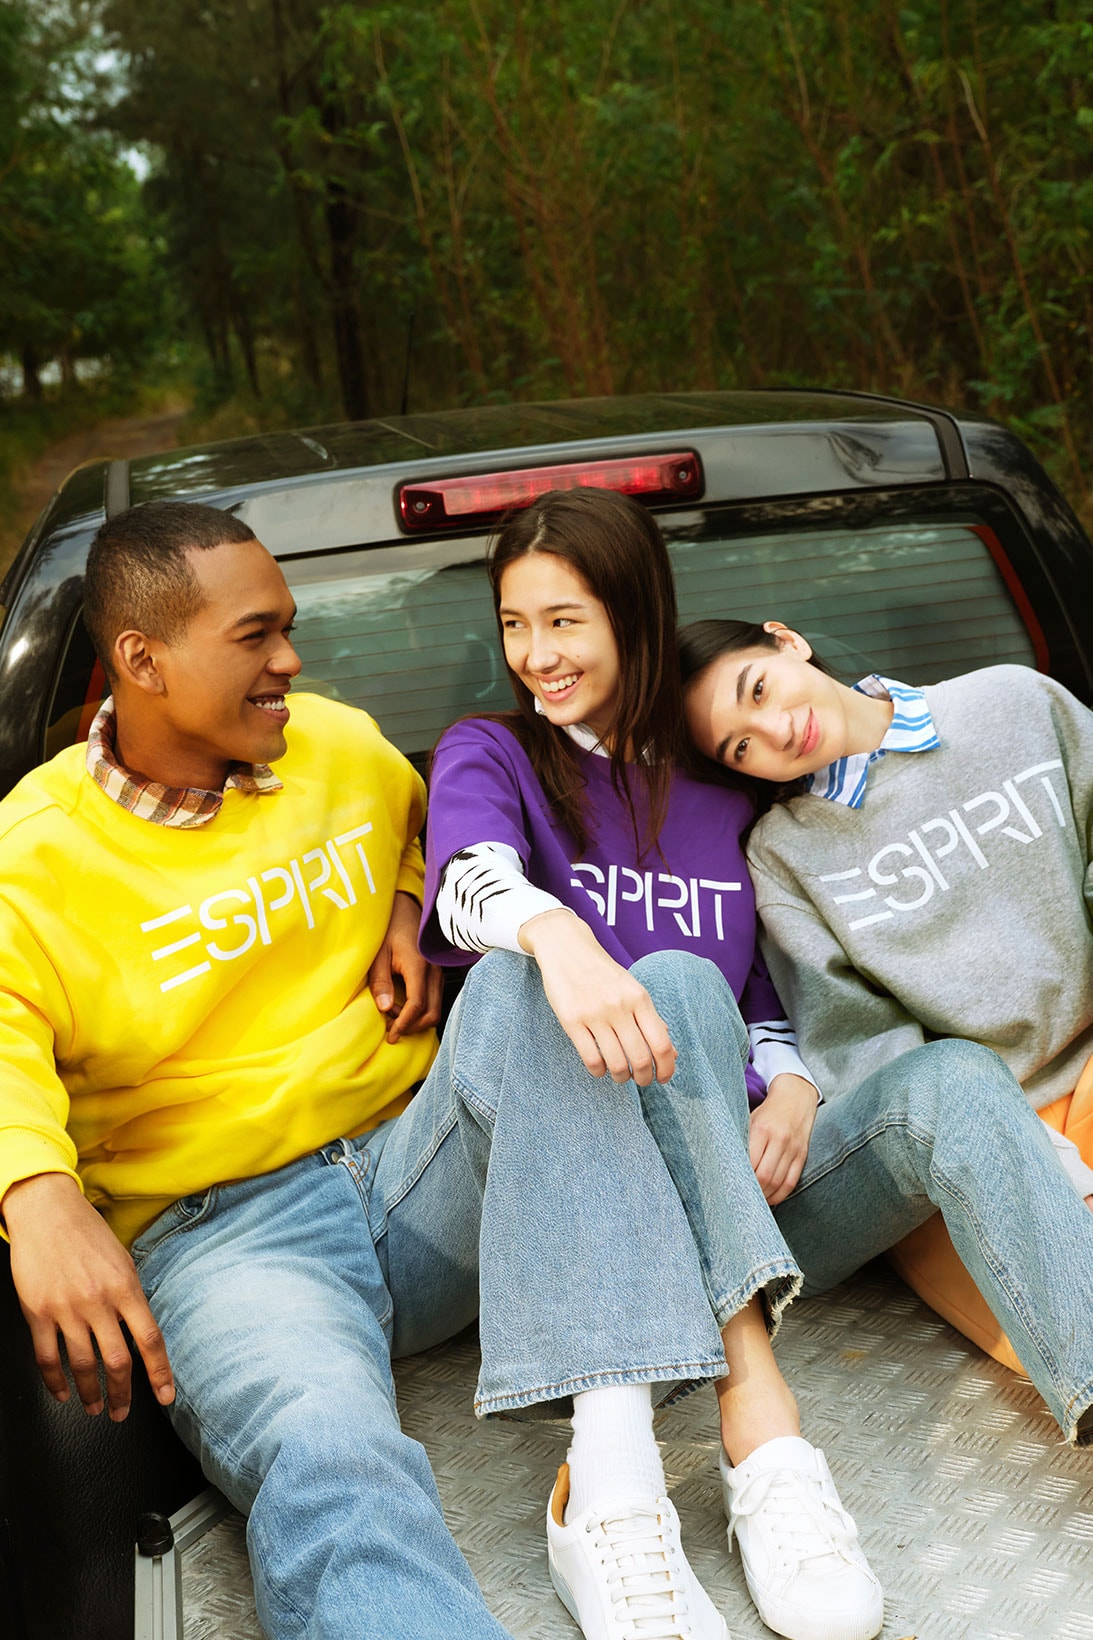 ESPRIT Archive Re-Issue Capsule Collection Sweatshirts T-Shirts